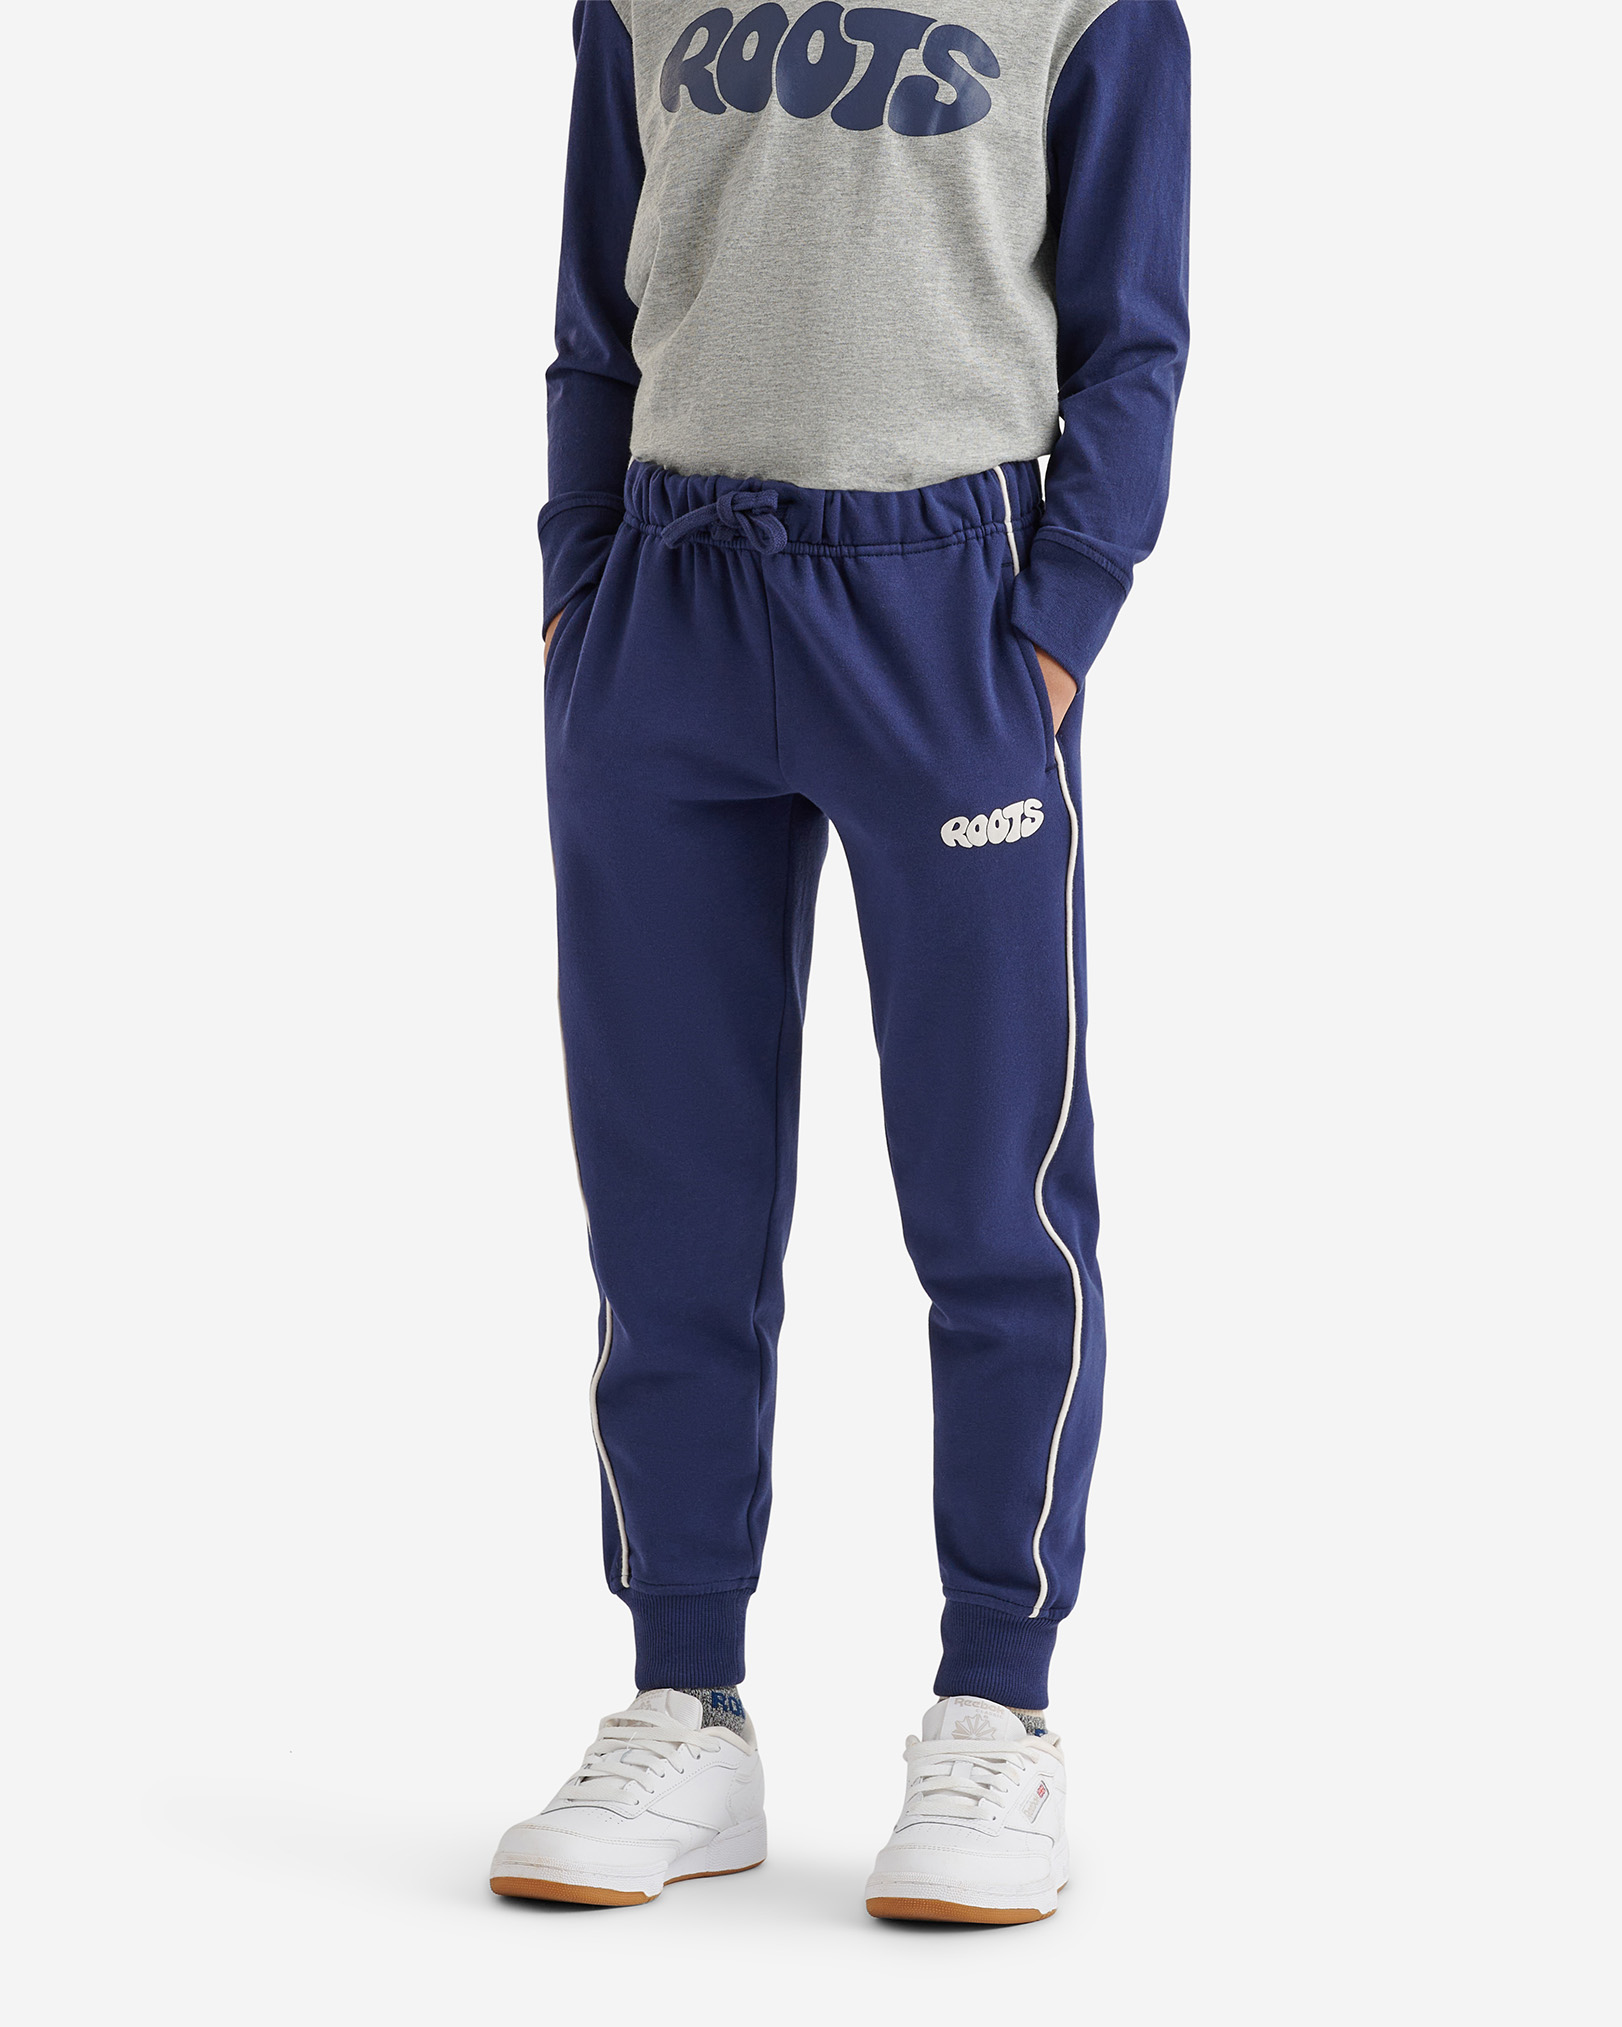 Roots Kids Active Track Jogger Pants in Naval Blue